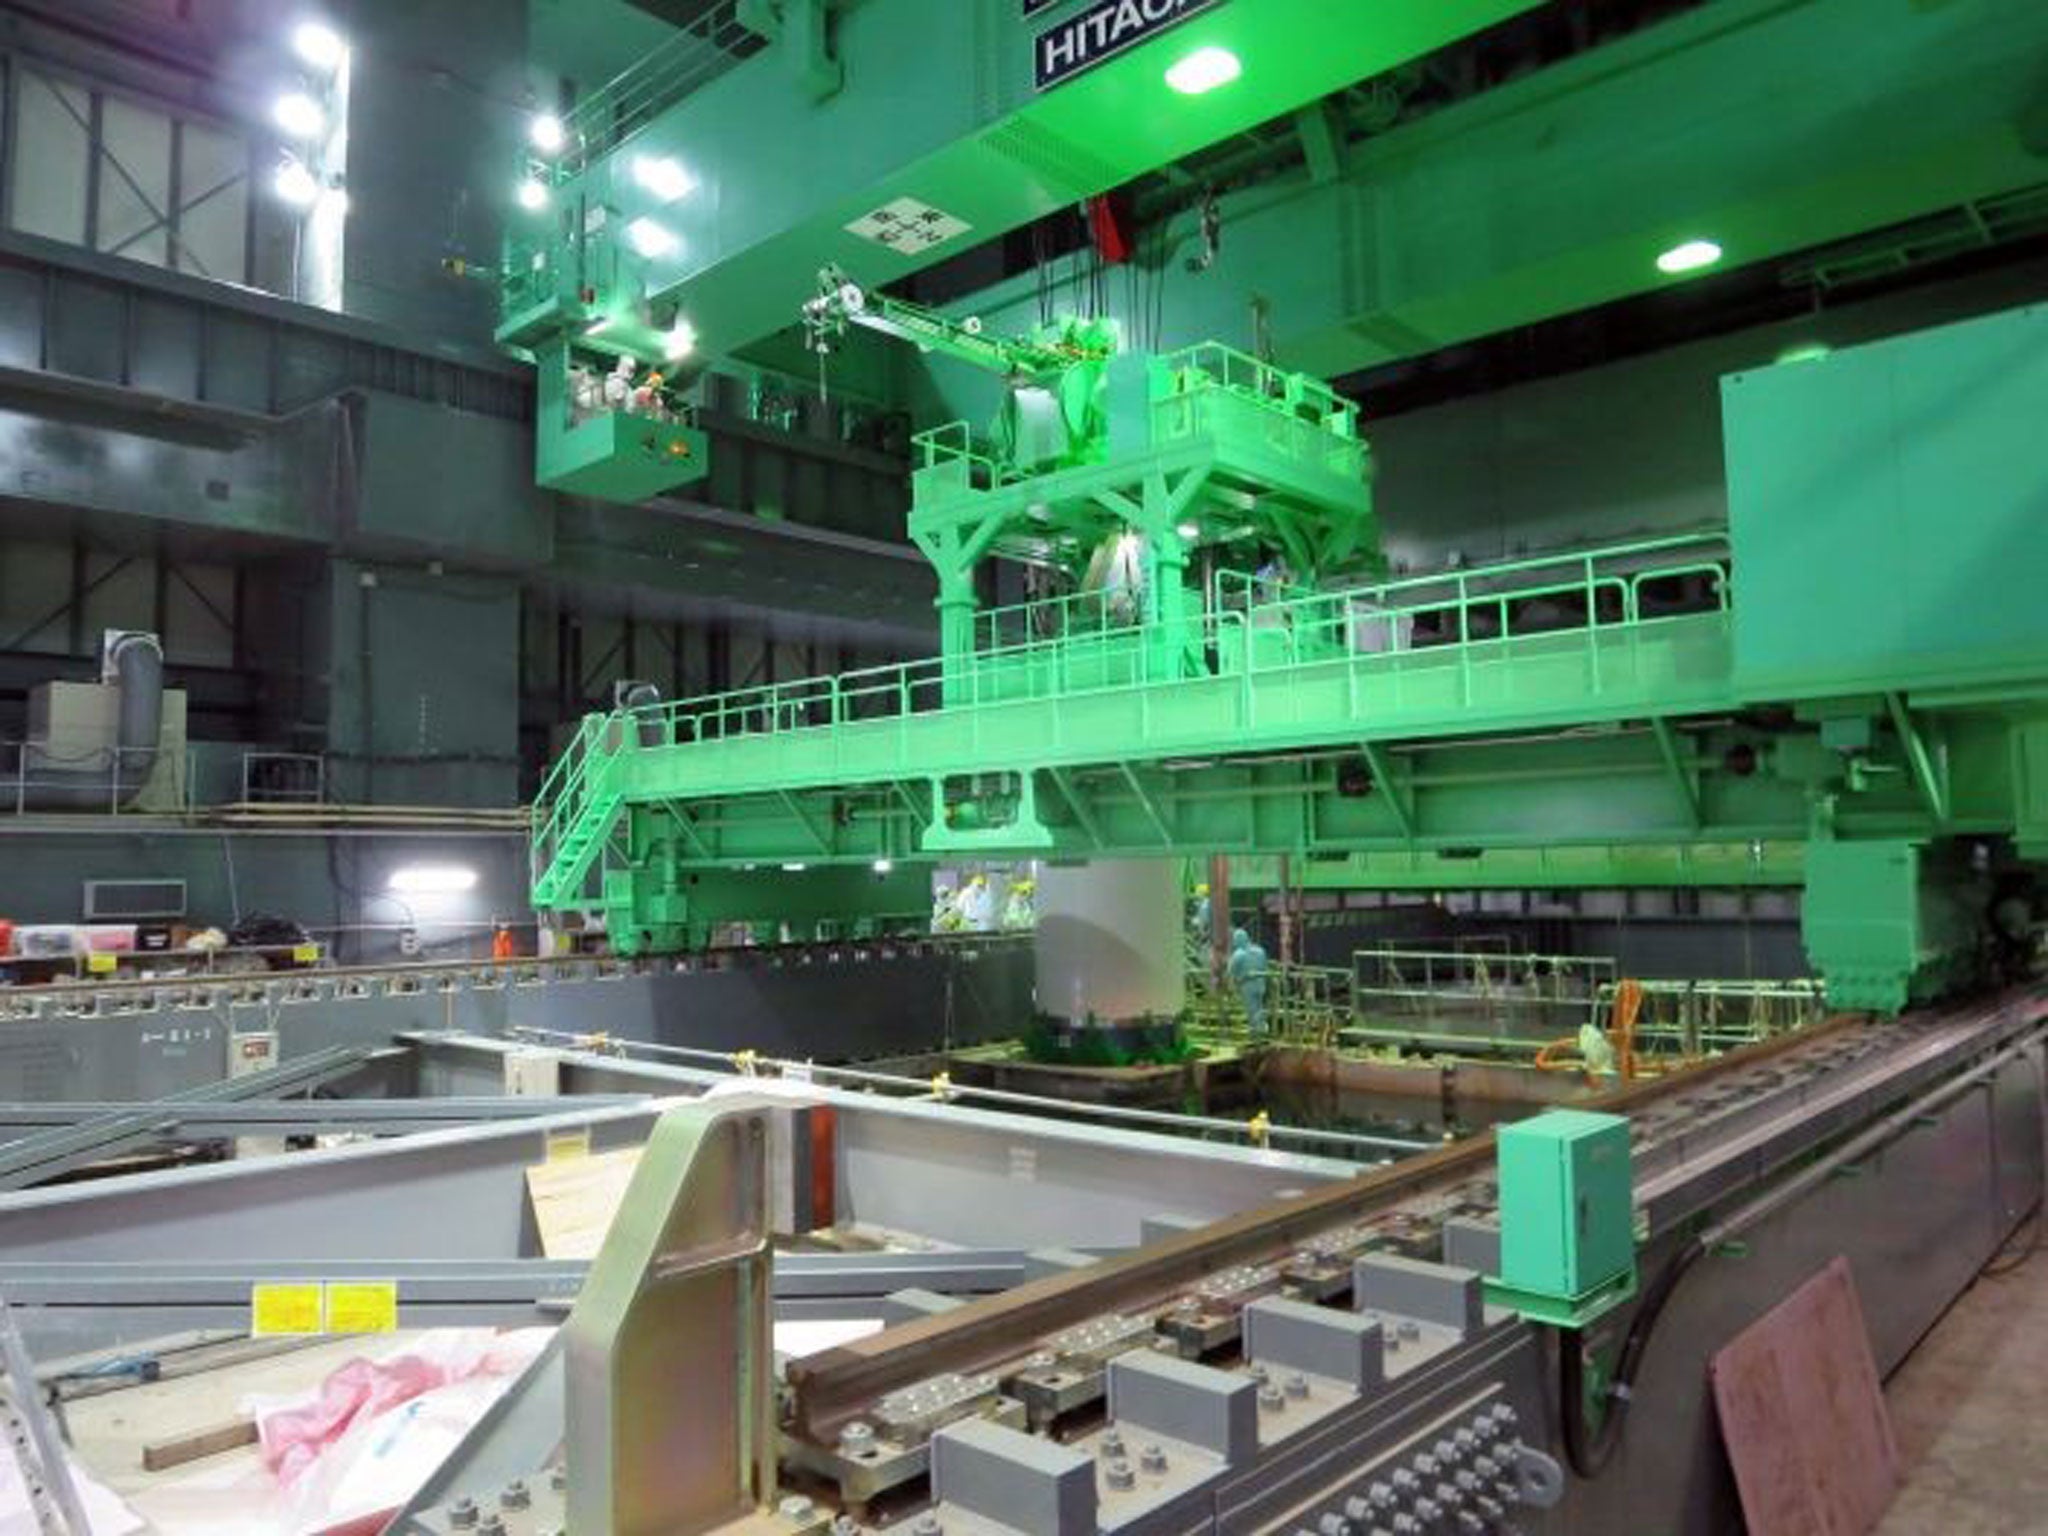 Tepco starts to remove nuclear fuel rods from the spent storage pool of Fukushima's Unit 4 reactor